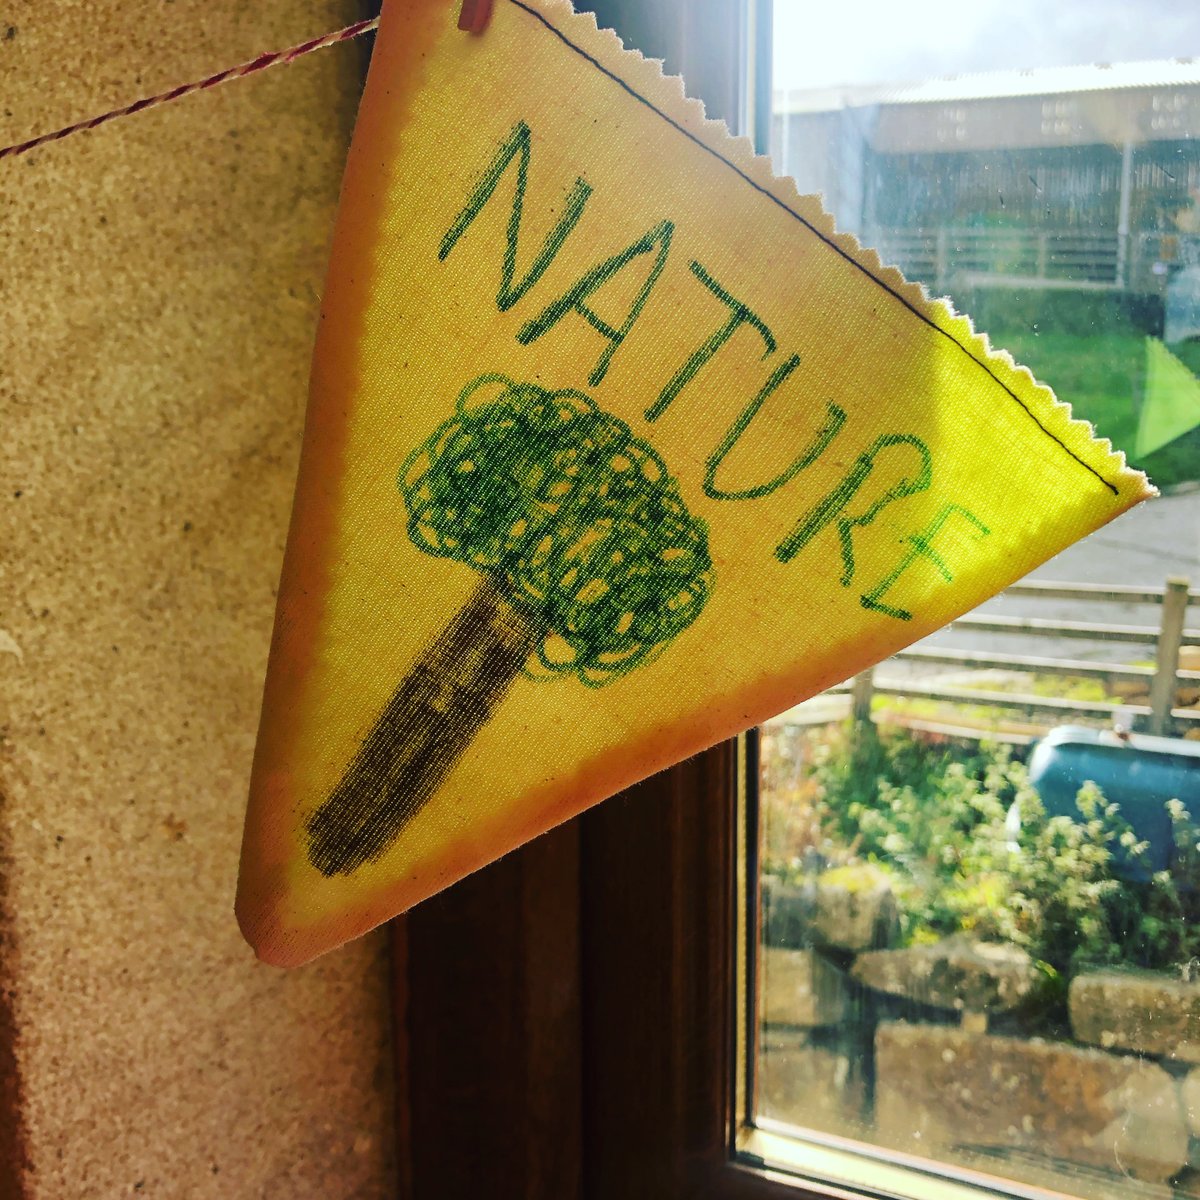 At the end of the 4th day we run a shoe mindfulness session and ask the group to end their time at the farm by recording a personal feeling about the week on a piece of bunting.... #mindfulness #bunting #buntingflag #mindfulnesspractice #apprentice #yorkshireapprenticebuilder